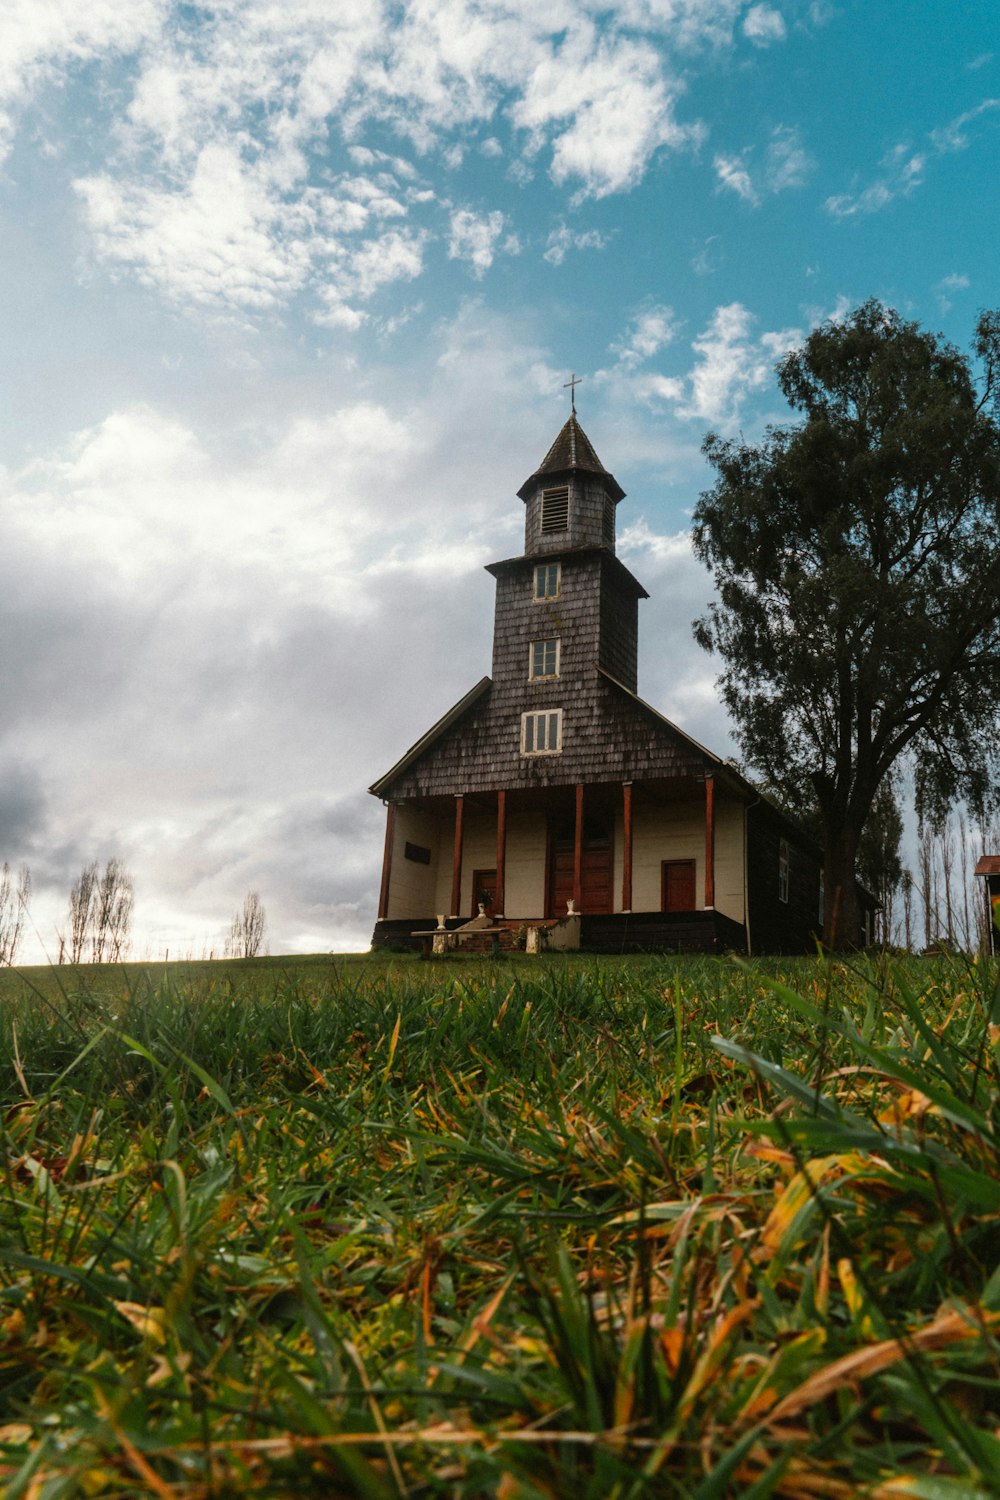 a small church with a steeple on a grassy hill